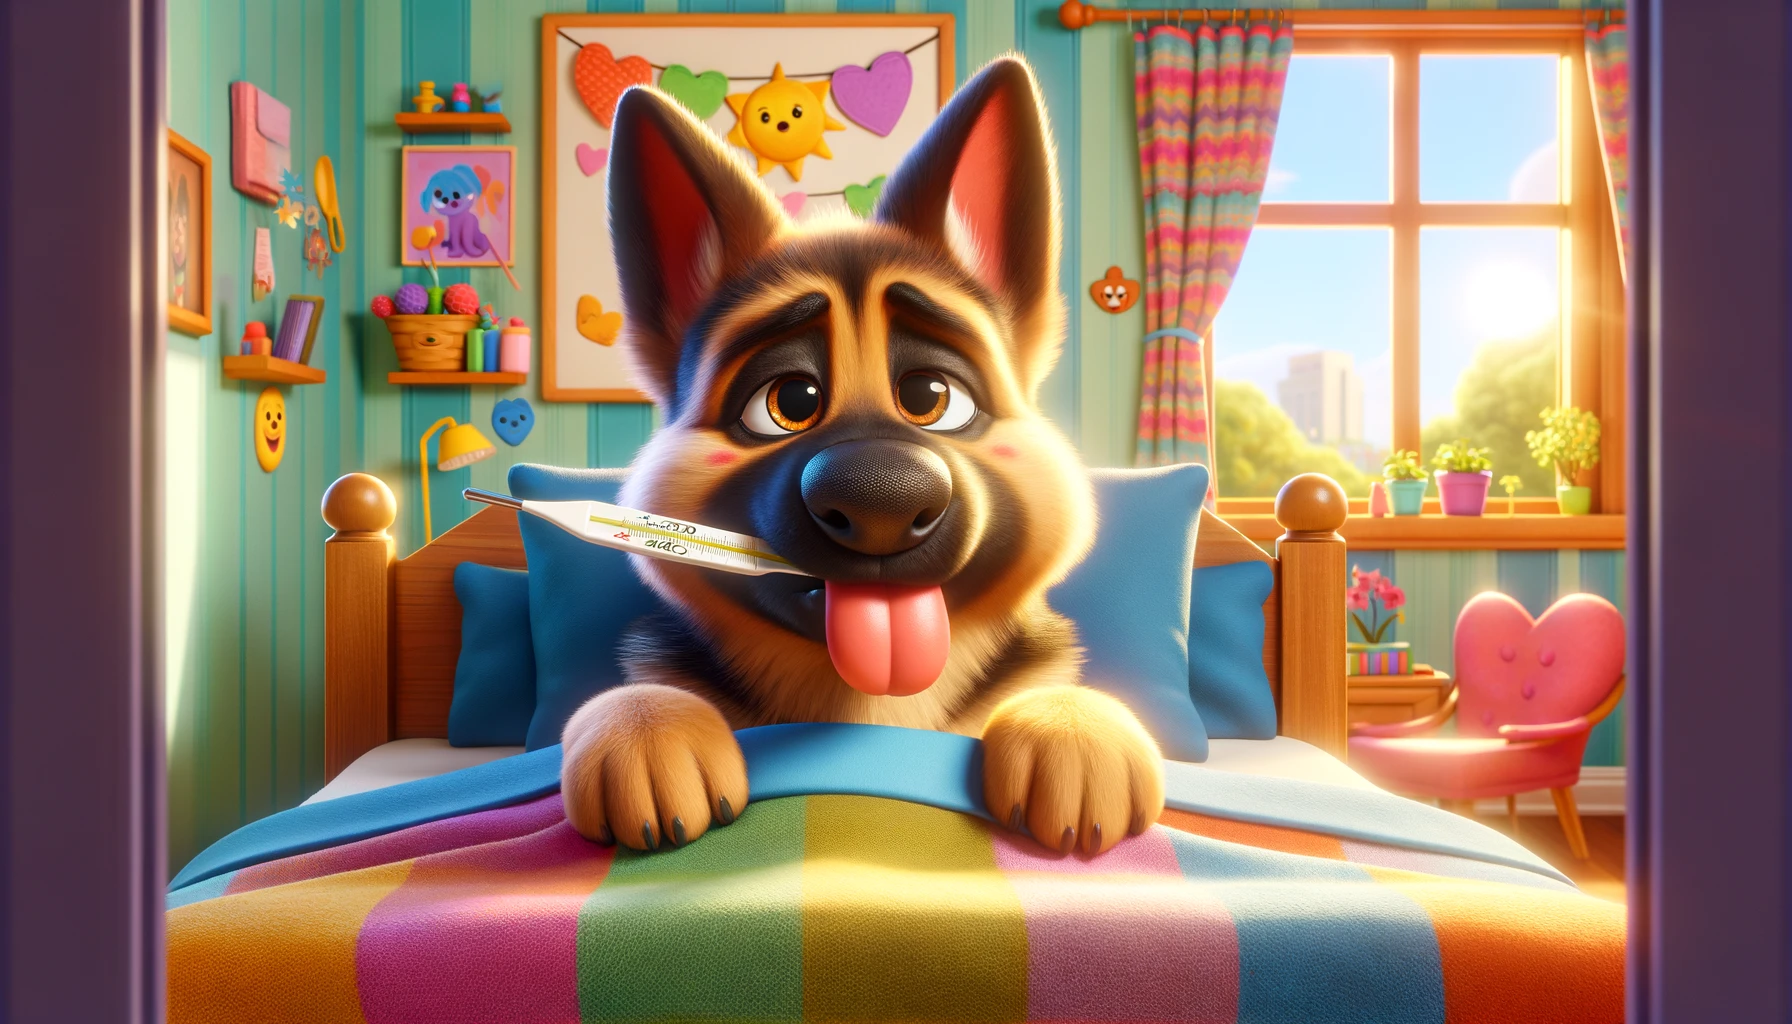 A cute German Shepherd lies in bed 'sick as a dog' with a thermometer in his mouth, surrounded by vibrant, colorful decor.